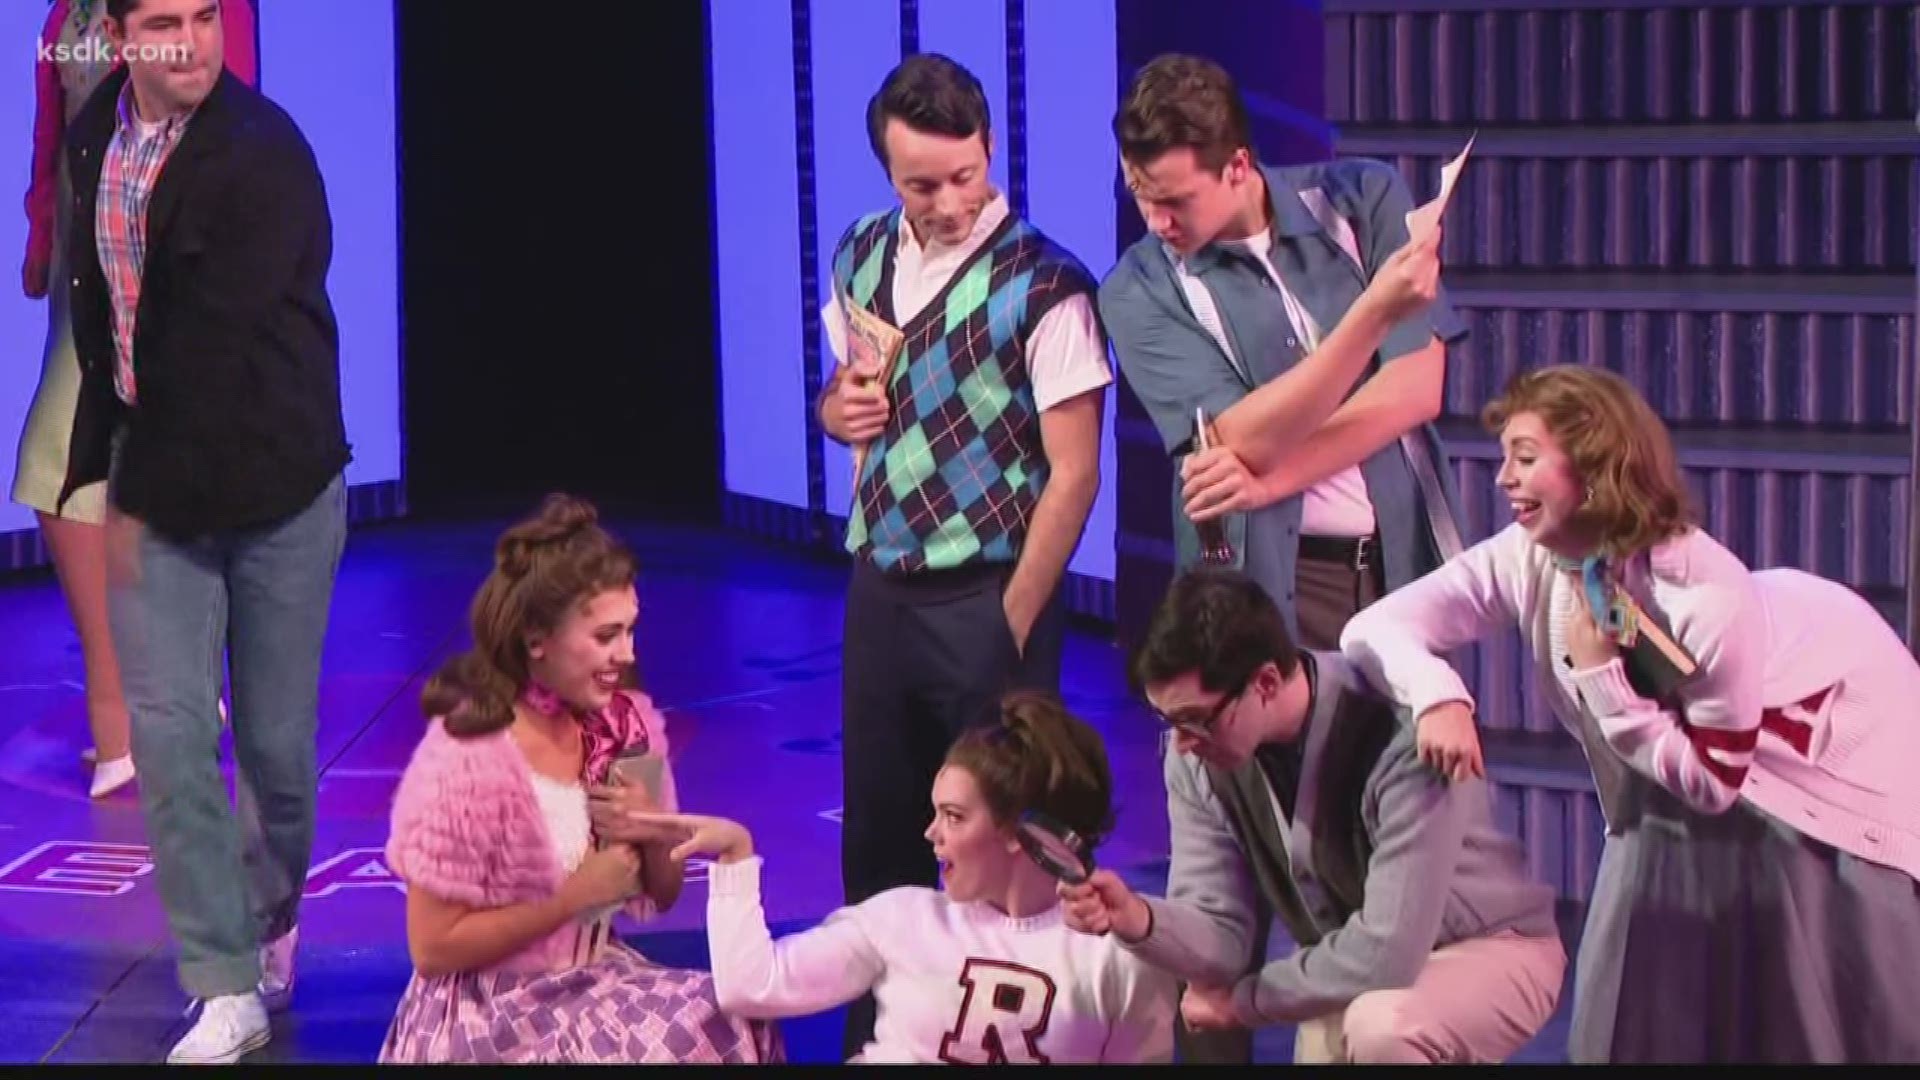 See Grease on stage until August 18, 2019.